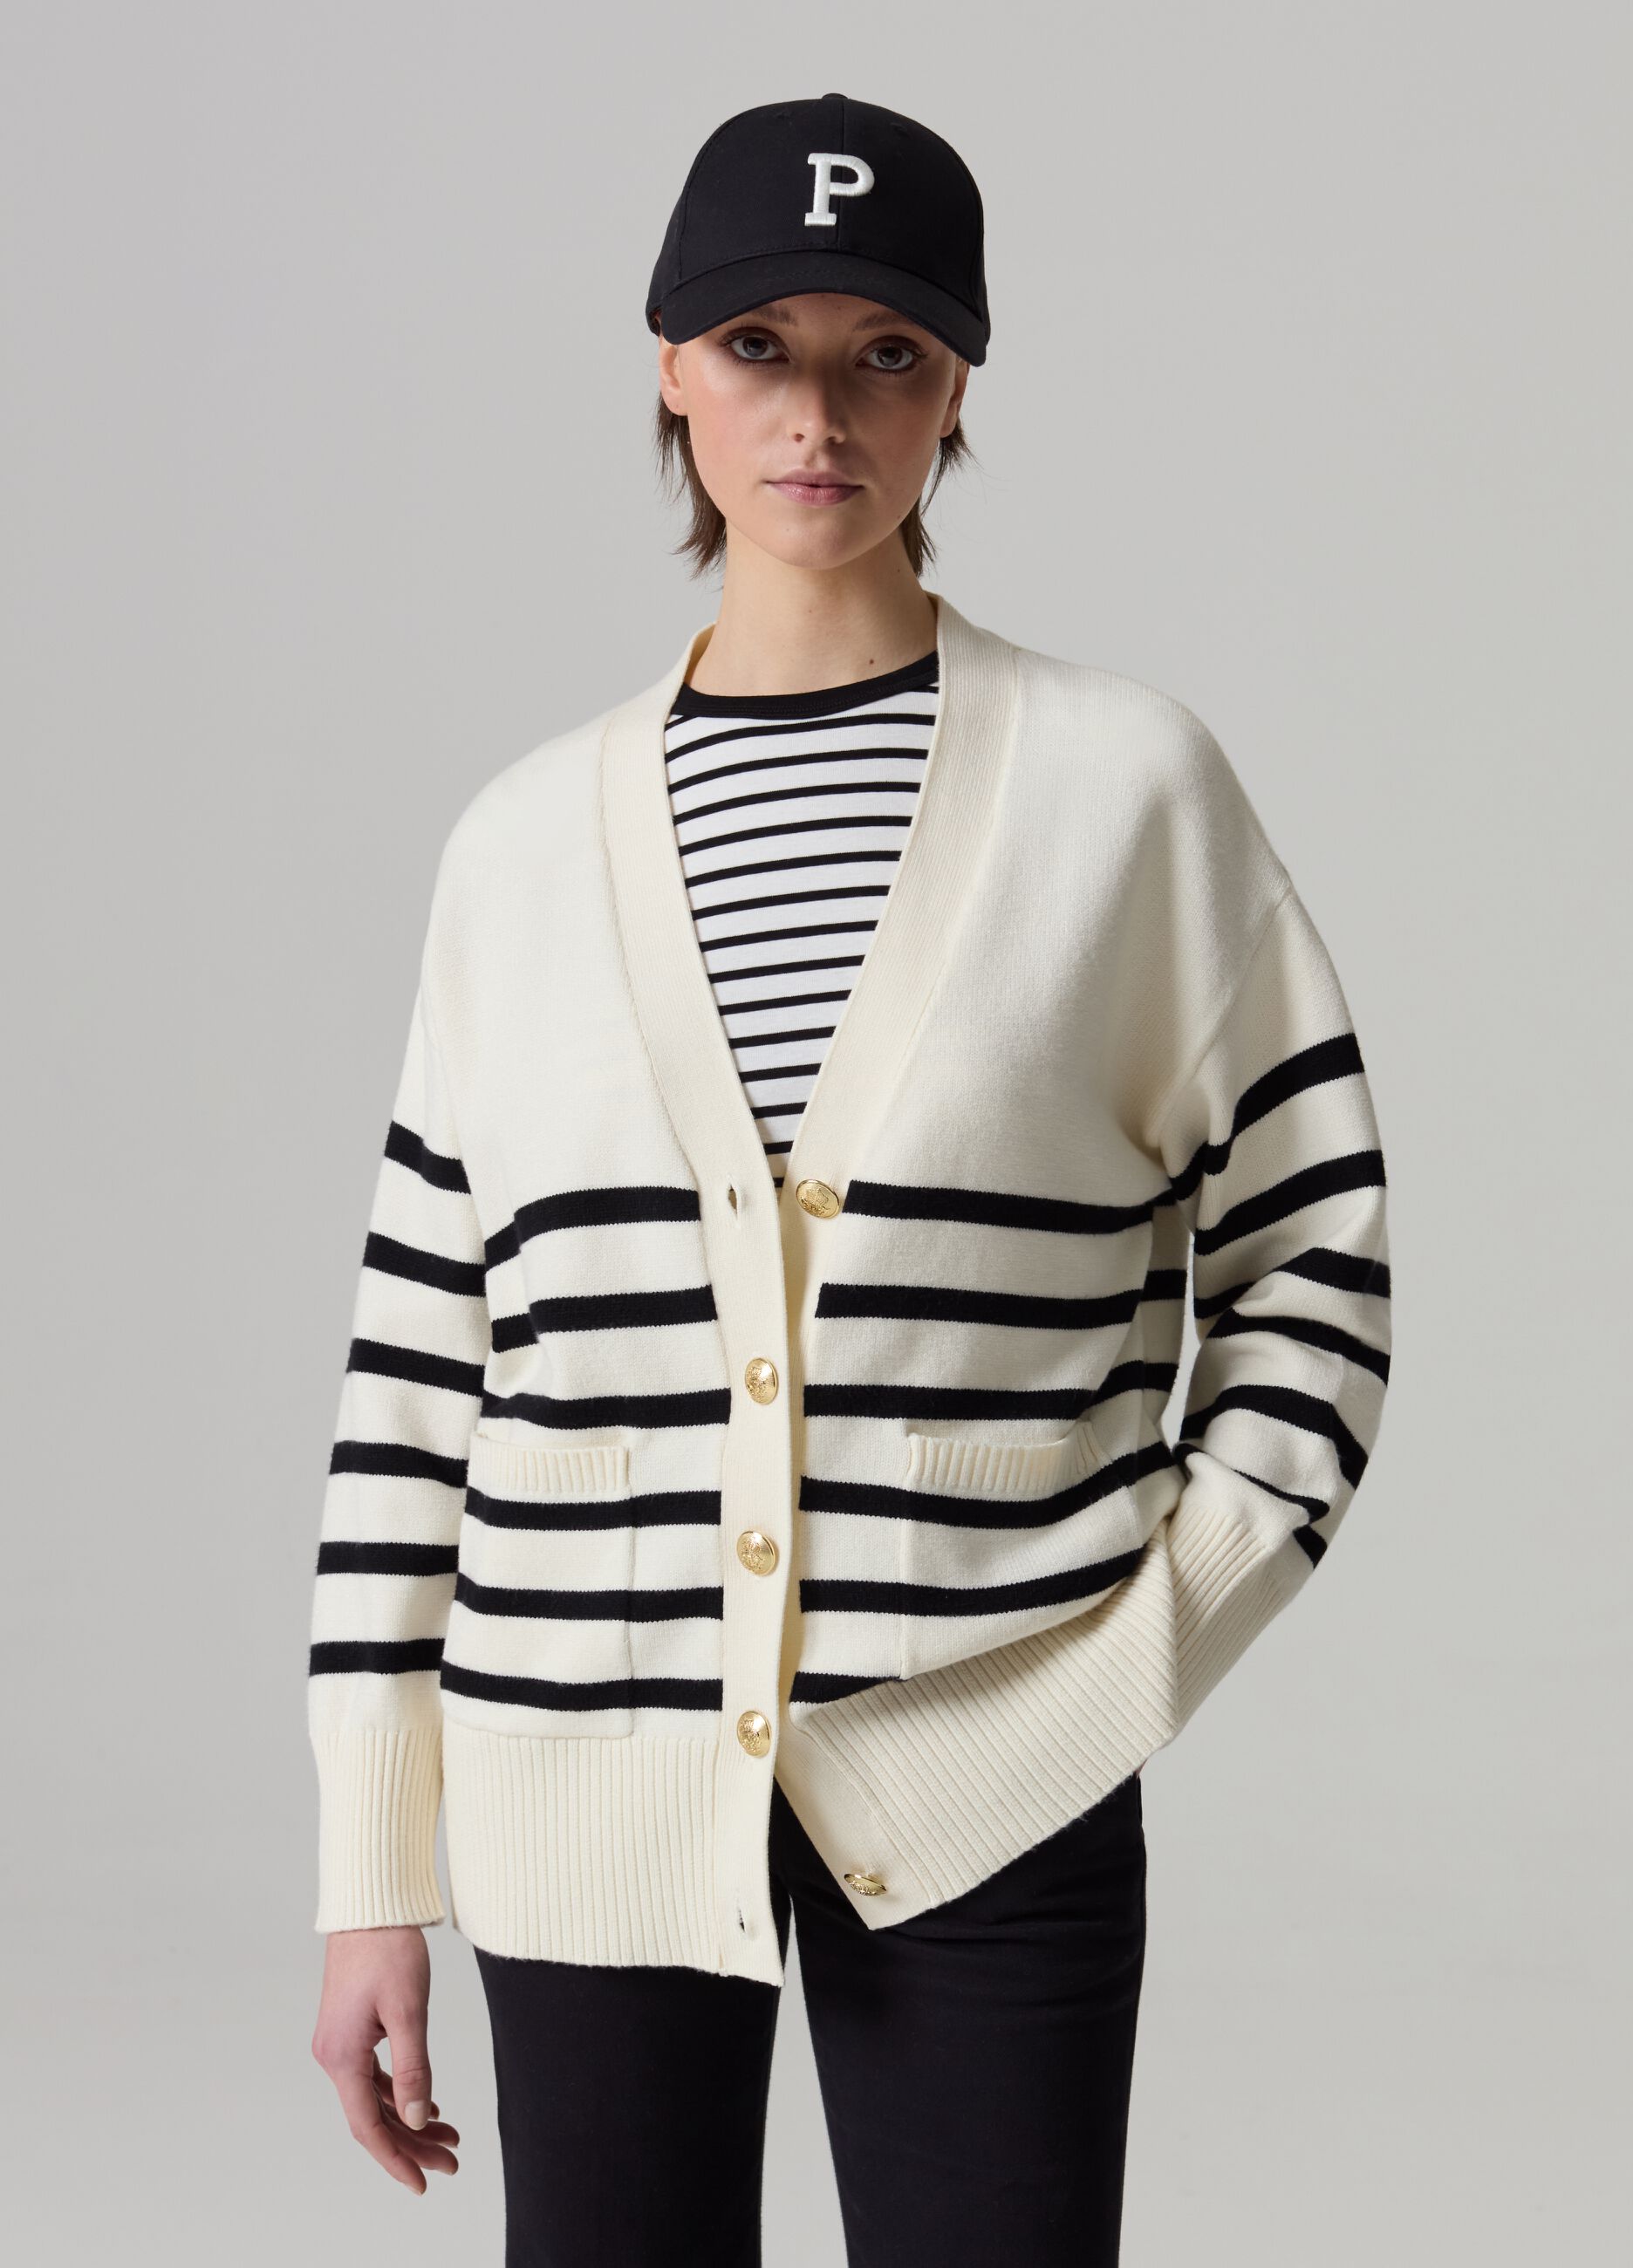 Oversized striped cardigan with buttons